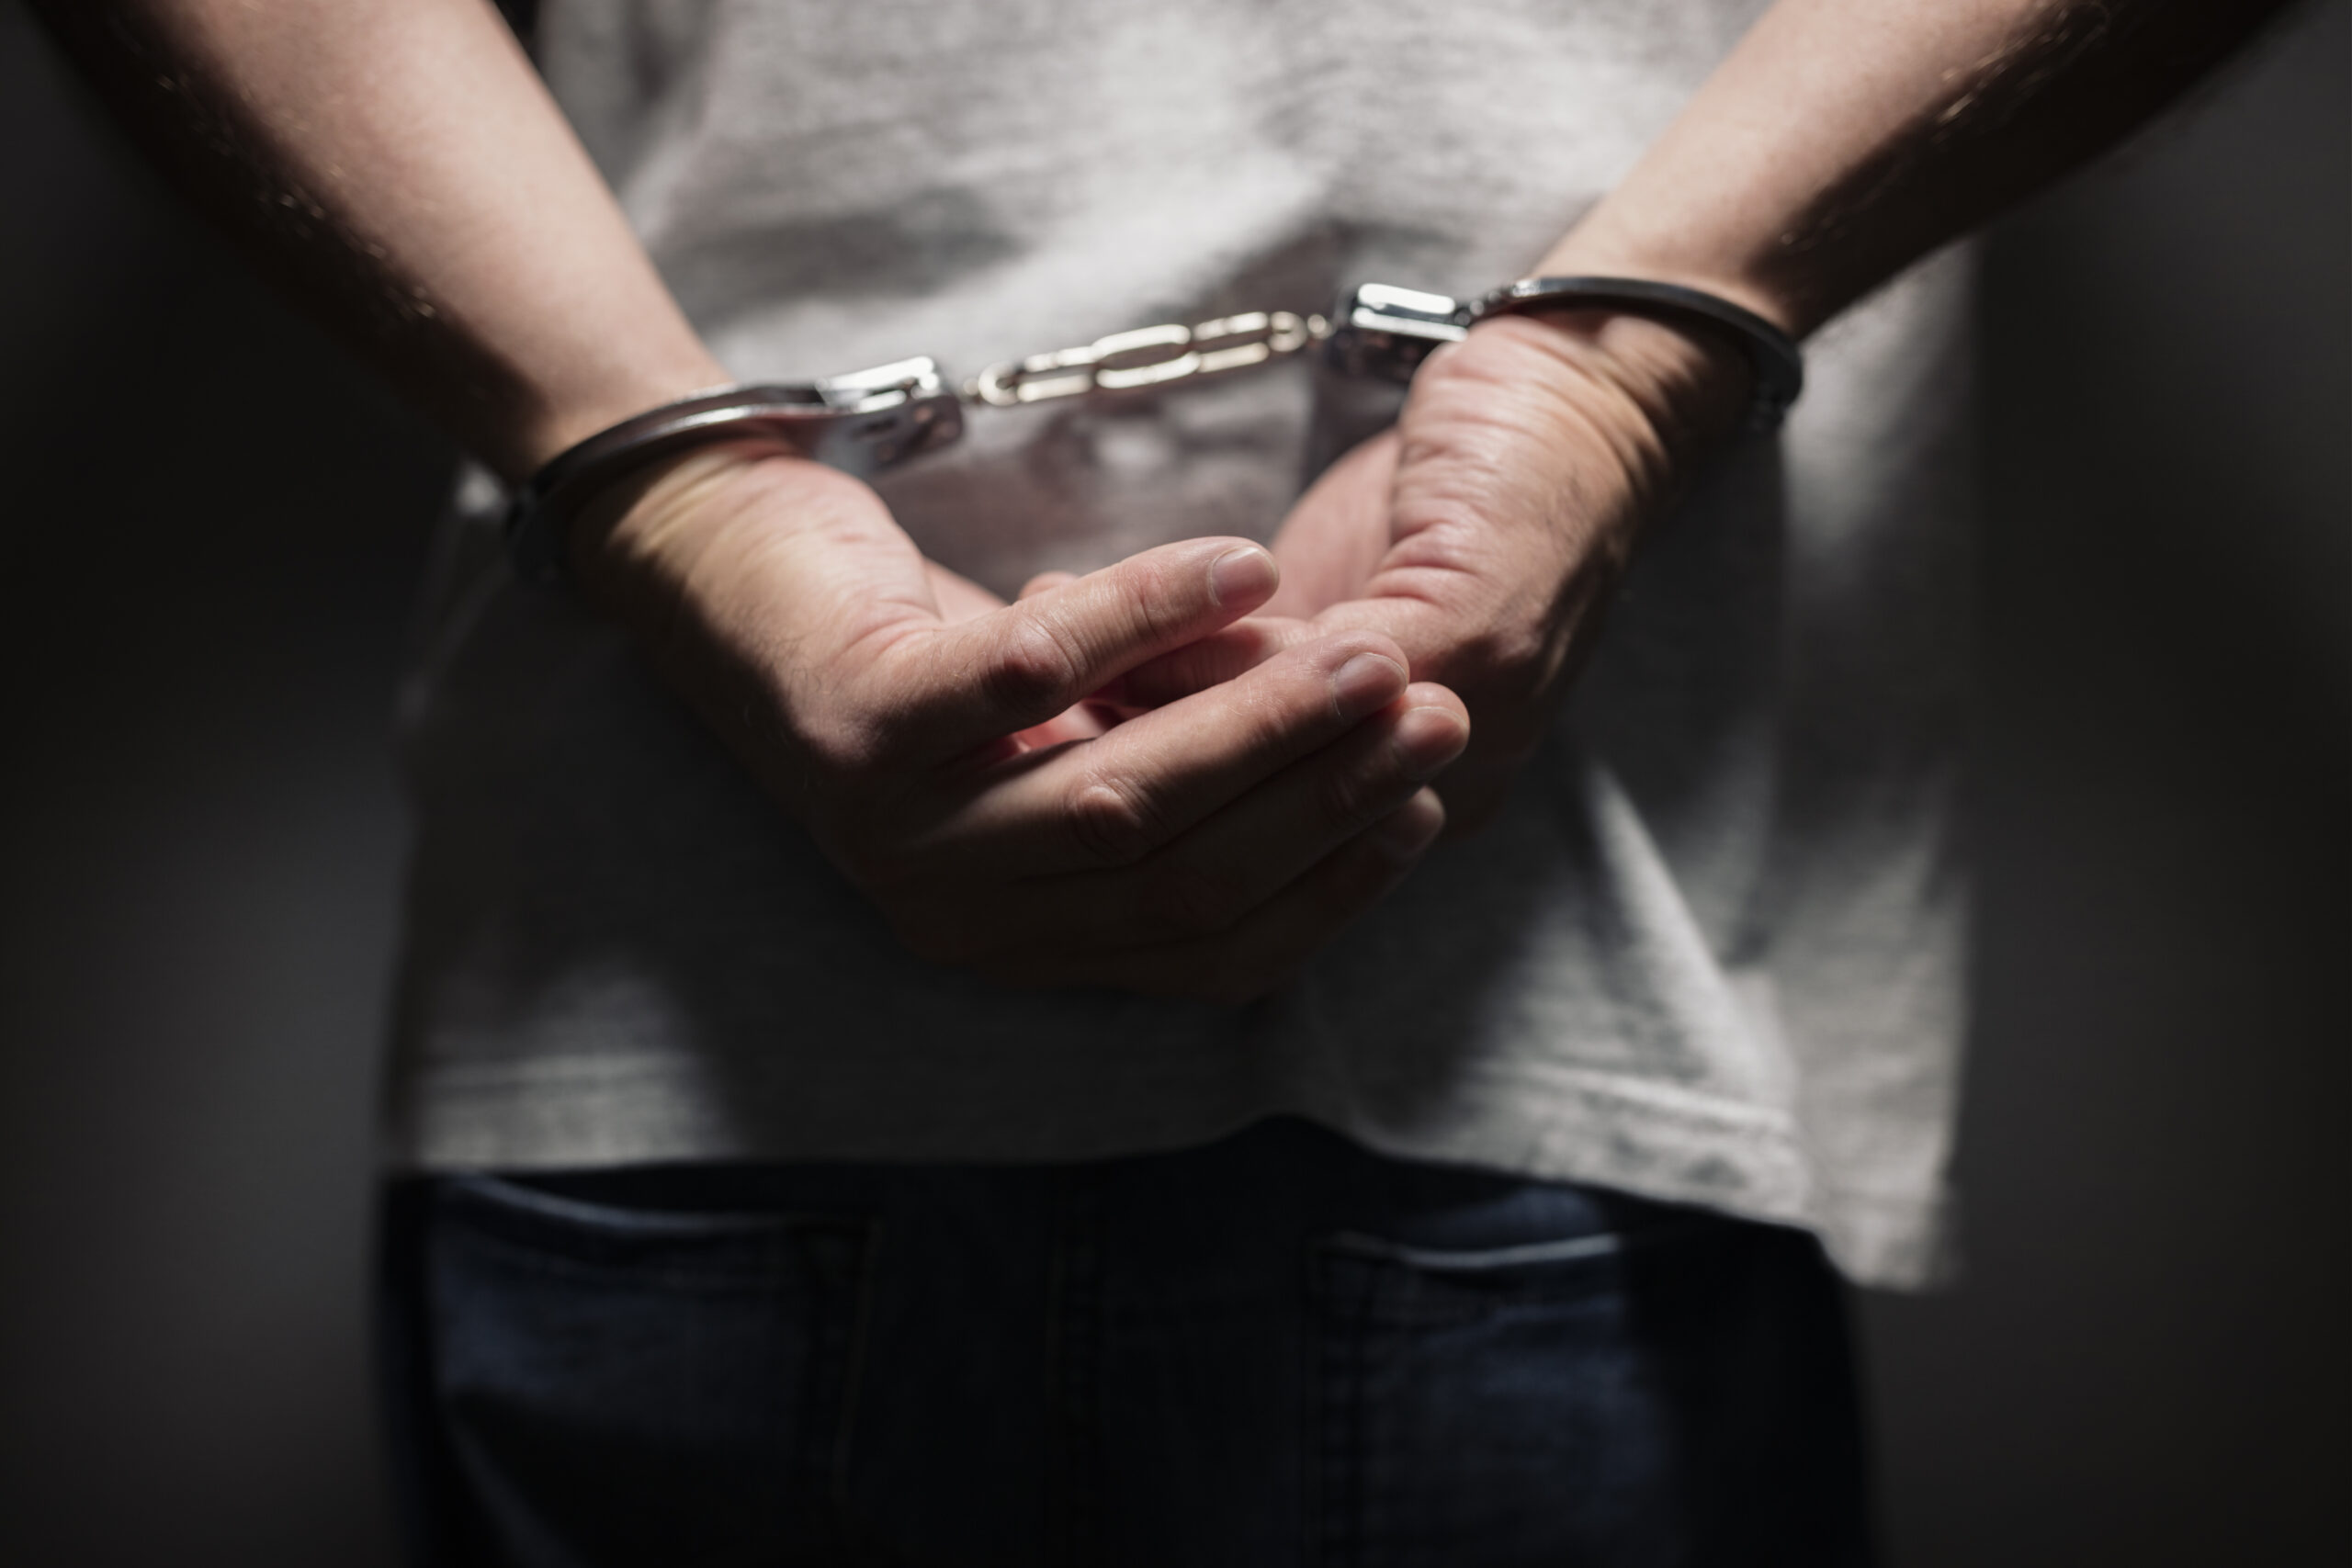 Ontario Criminal Defense Lawyers can help anyone arrested. 